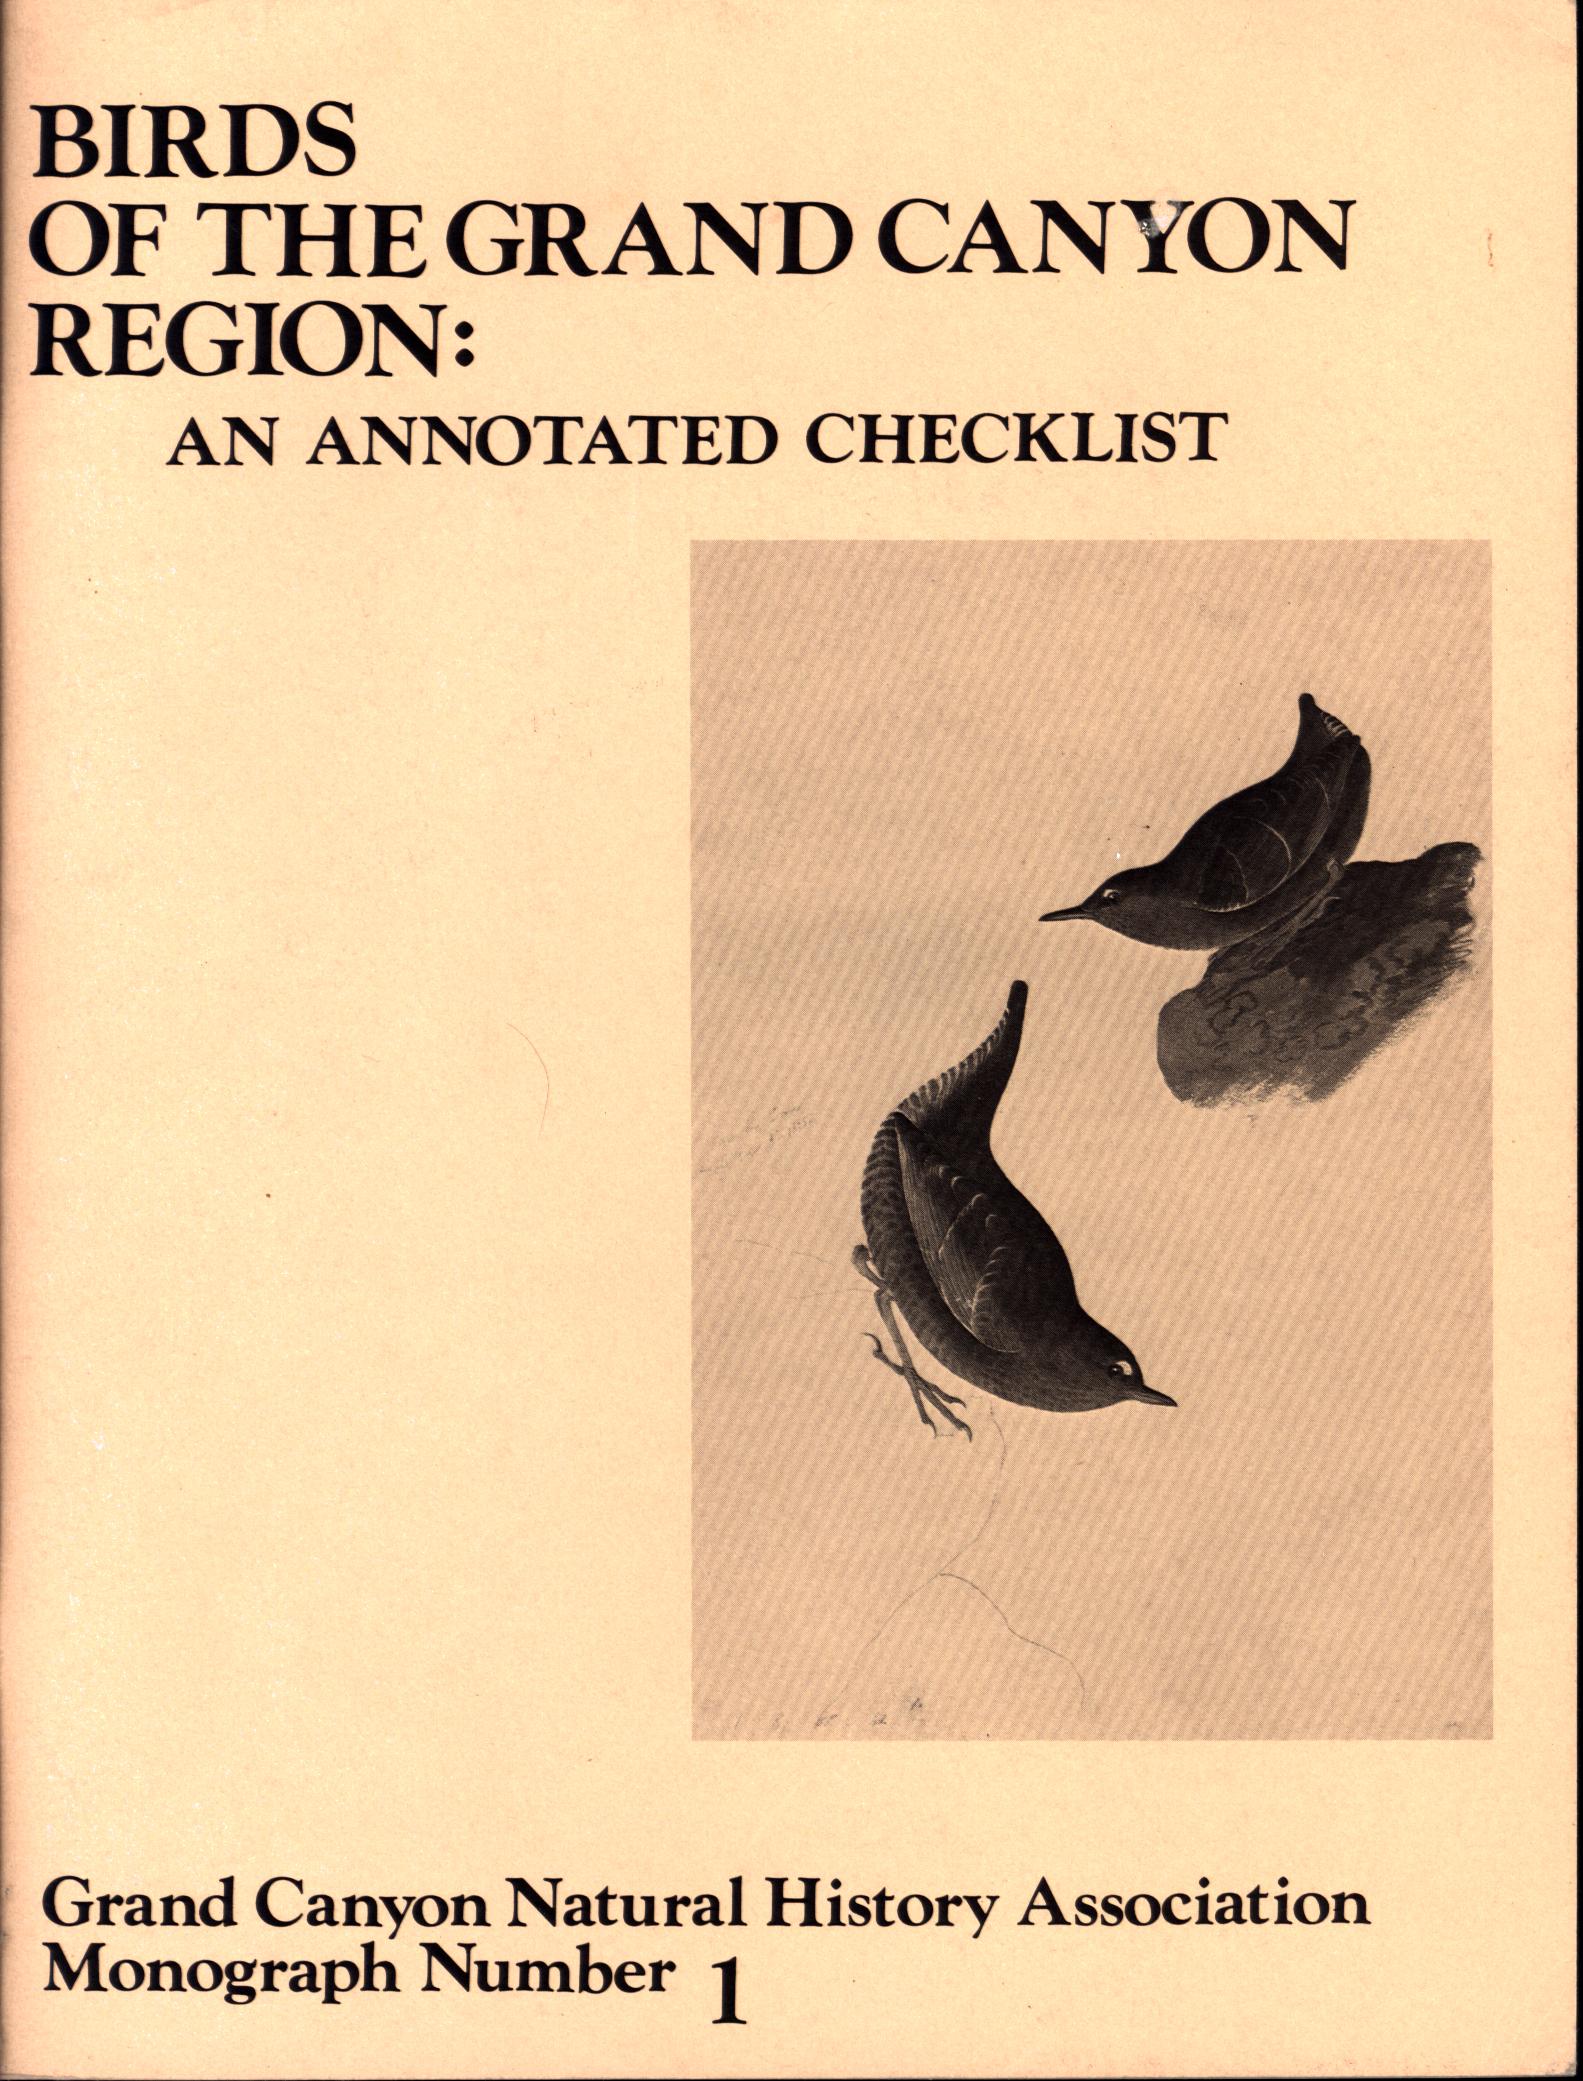 BIRDS OF THE GRAND CANYON REGION: an annotated checklist. 